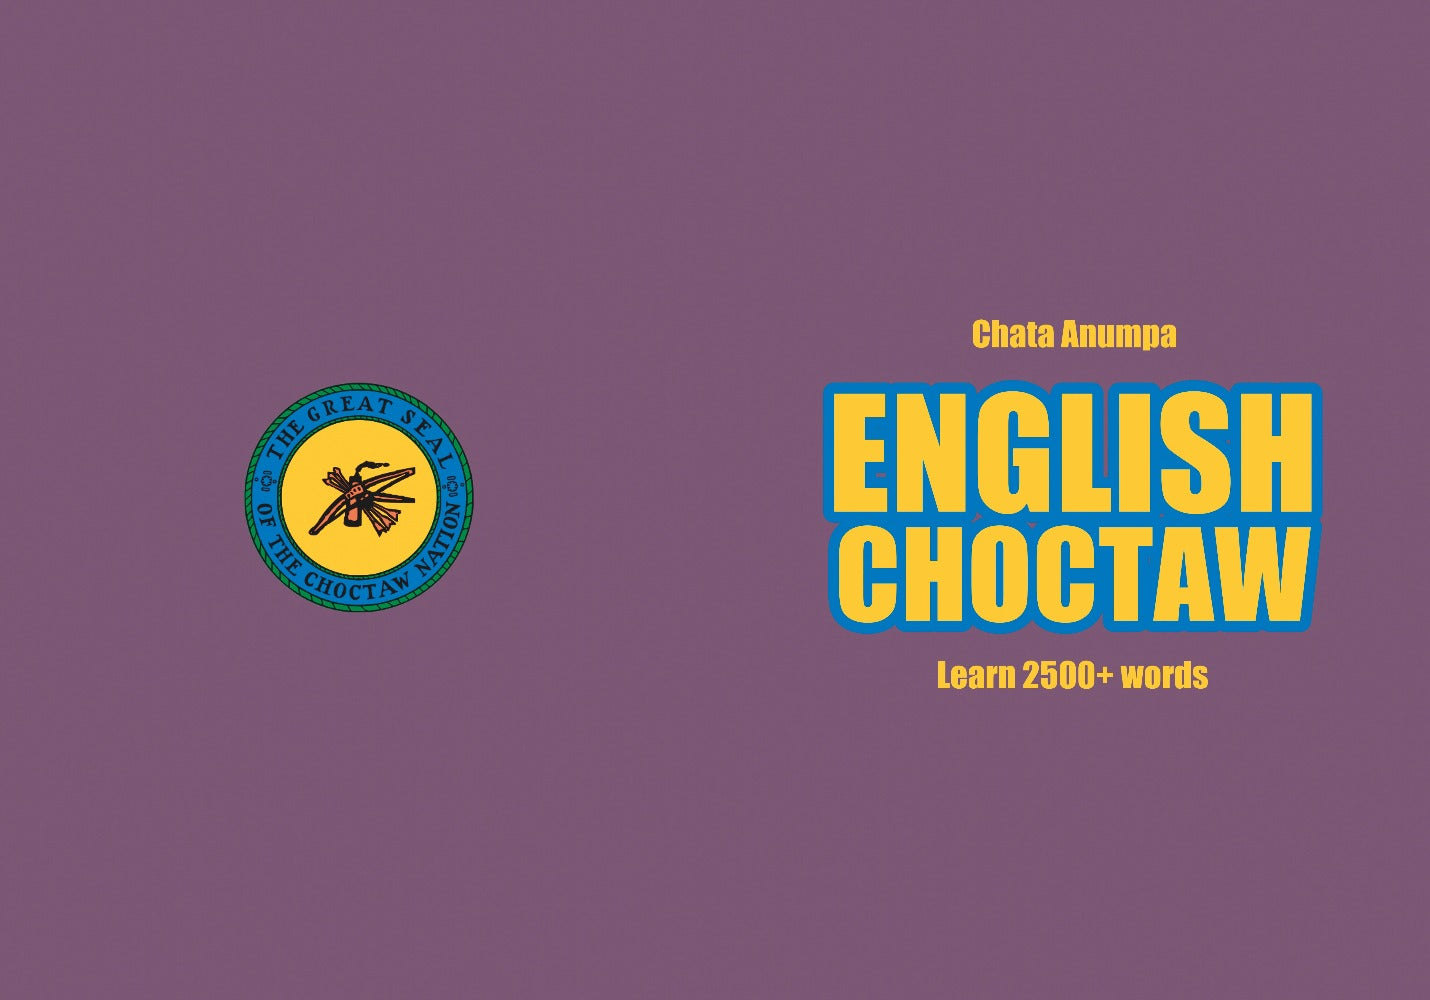 Choctaw language learning notebook cover